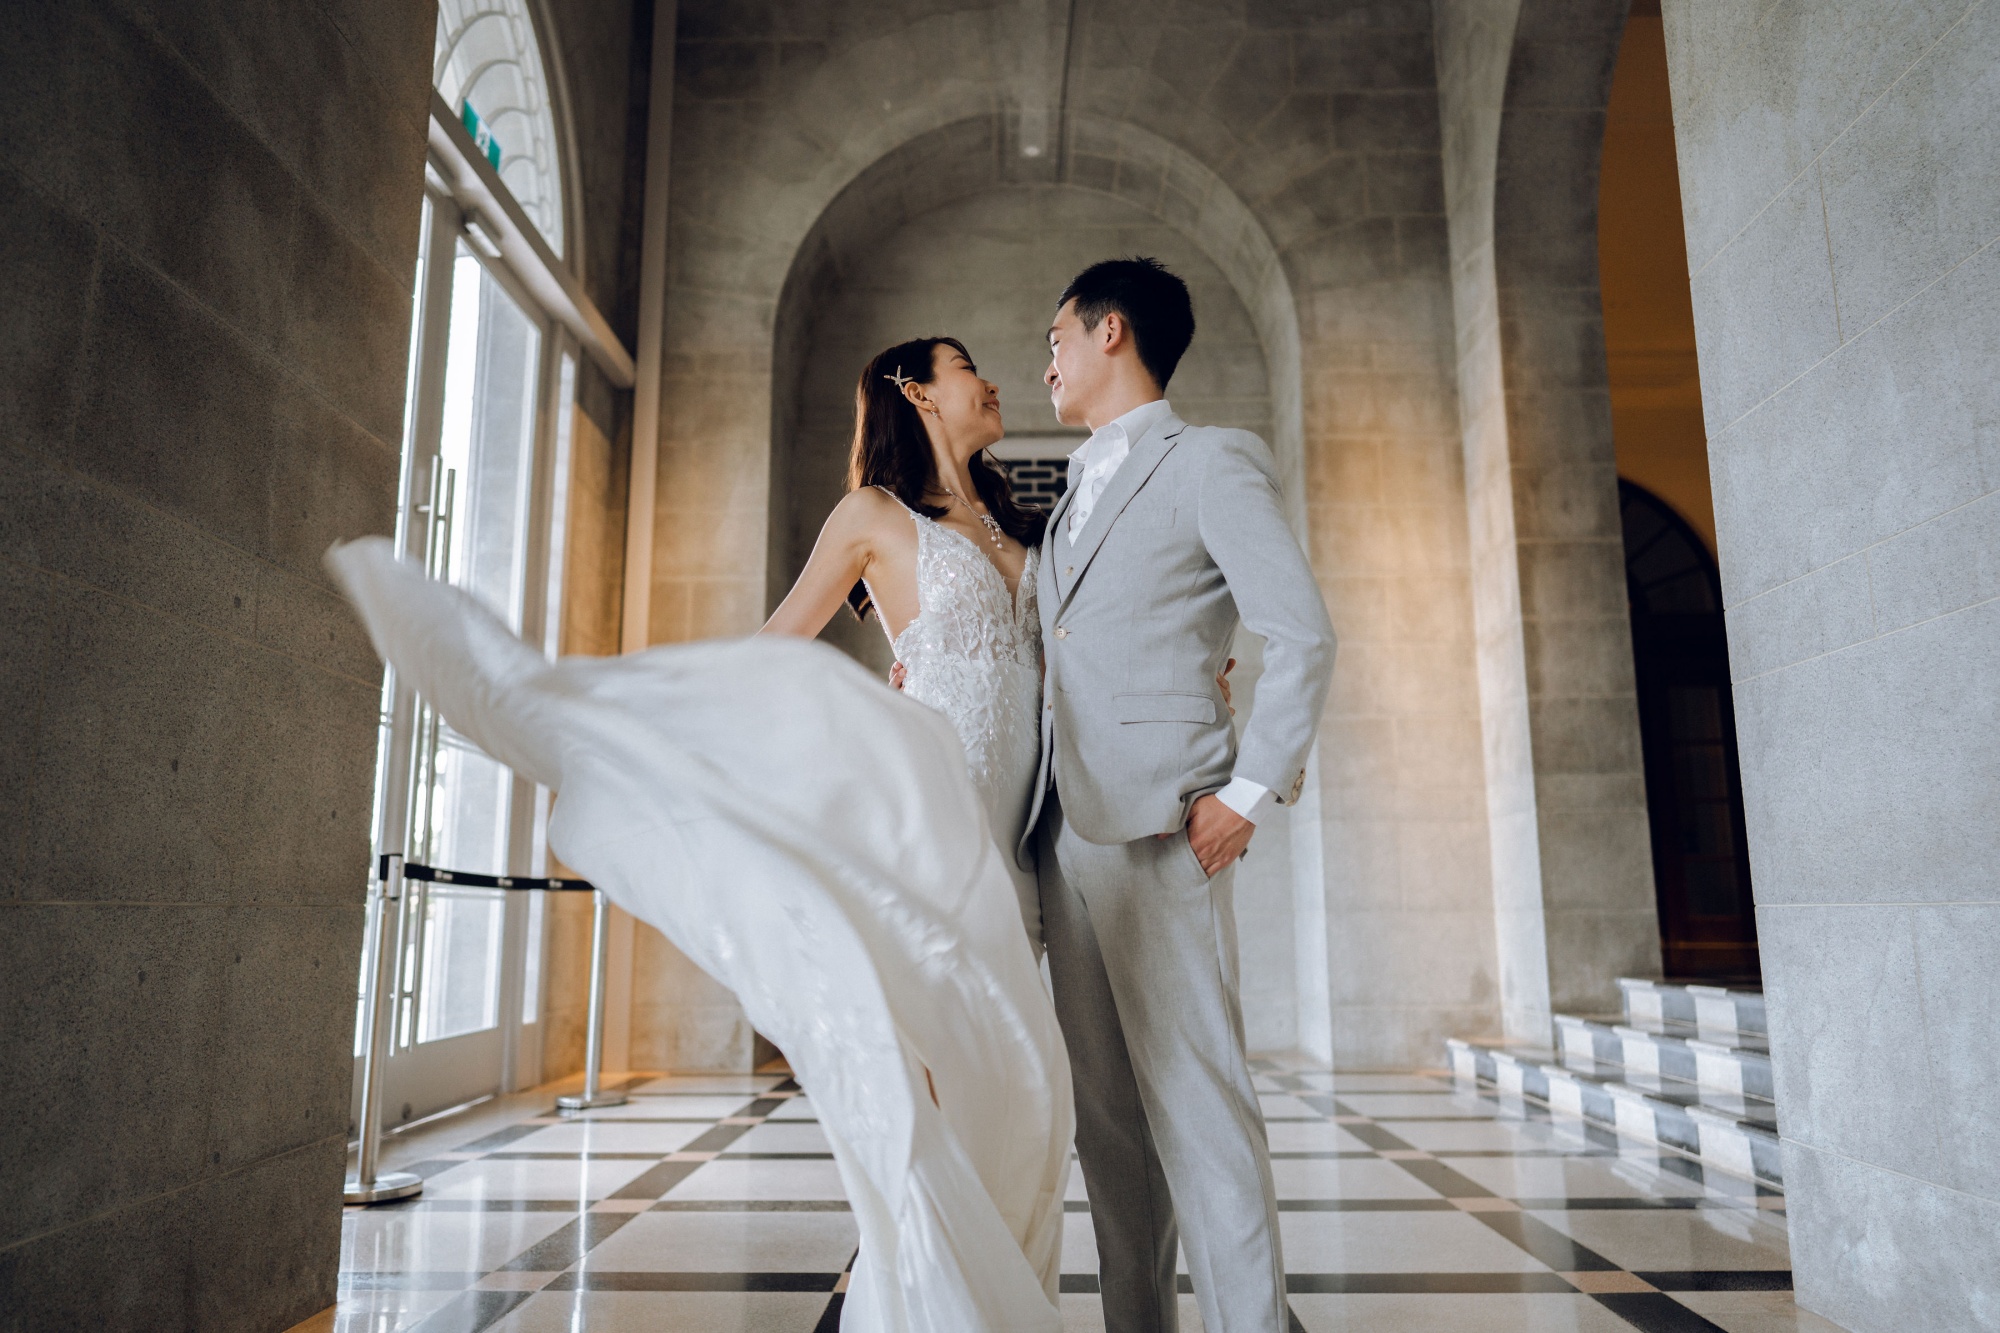 Prewedding Photoshoot At National Gallery And Armenian Street Carpet Shop by Samantha on OneThreeOneFour 16